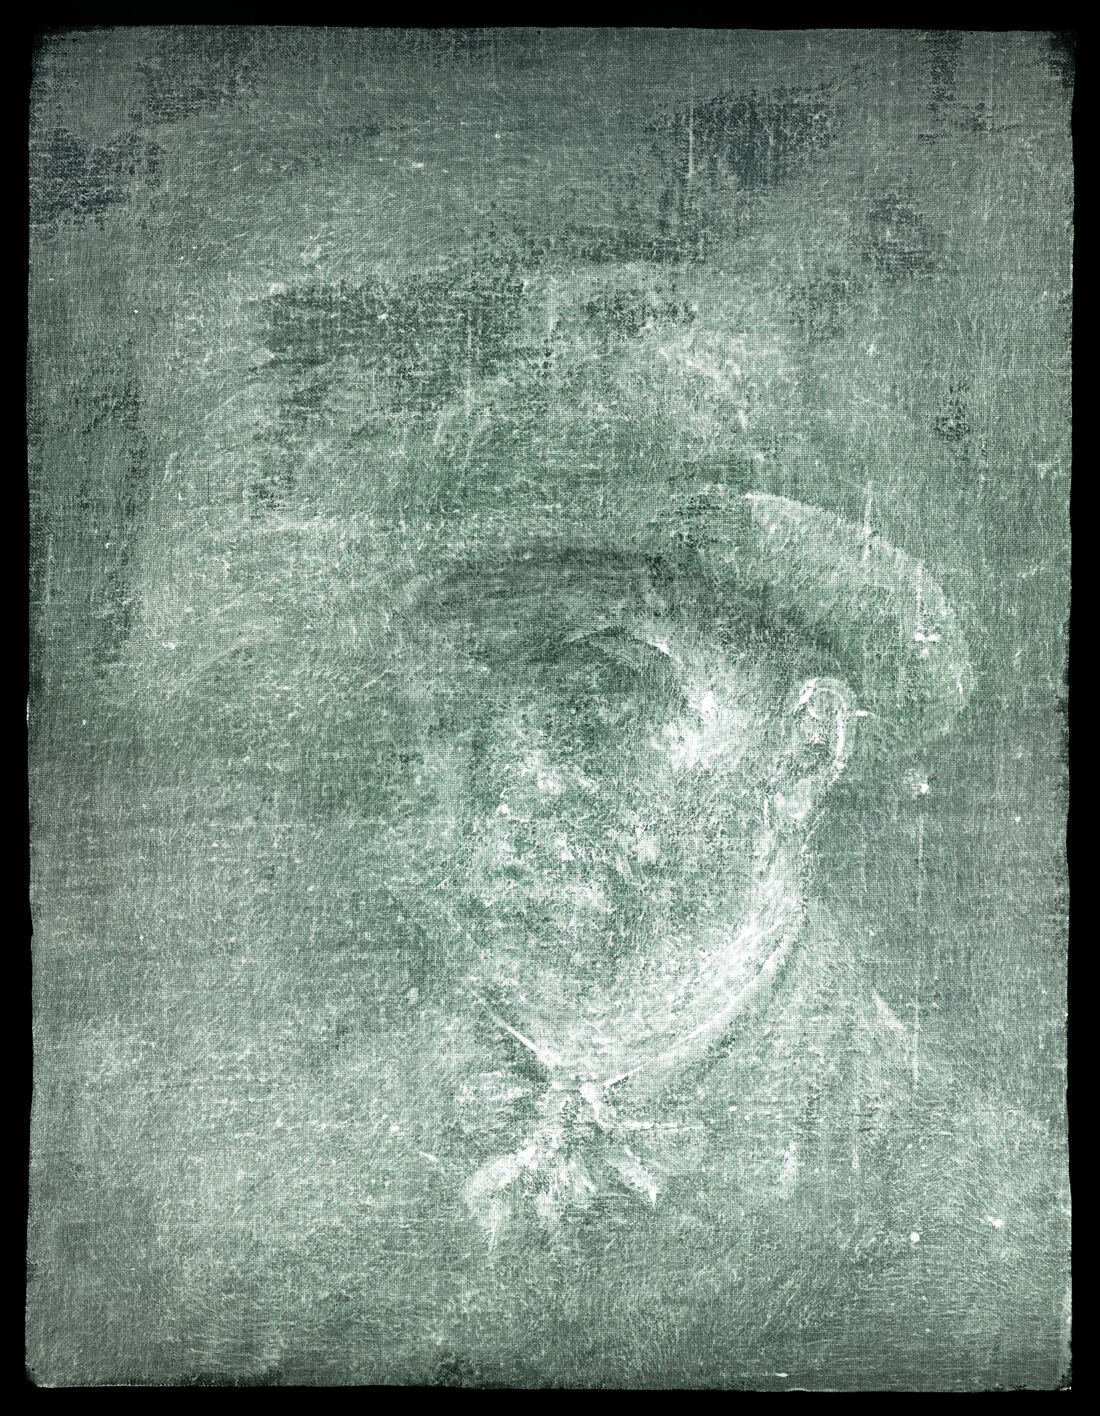 X-ray image of Vincent Van Gogh self-portrait, National Galleries of Scotland